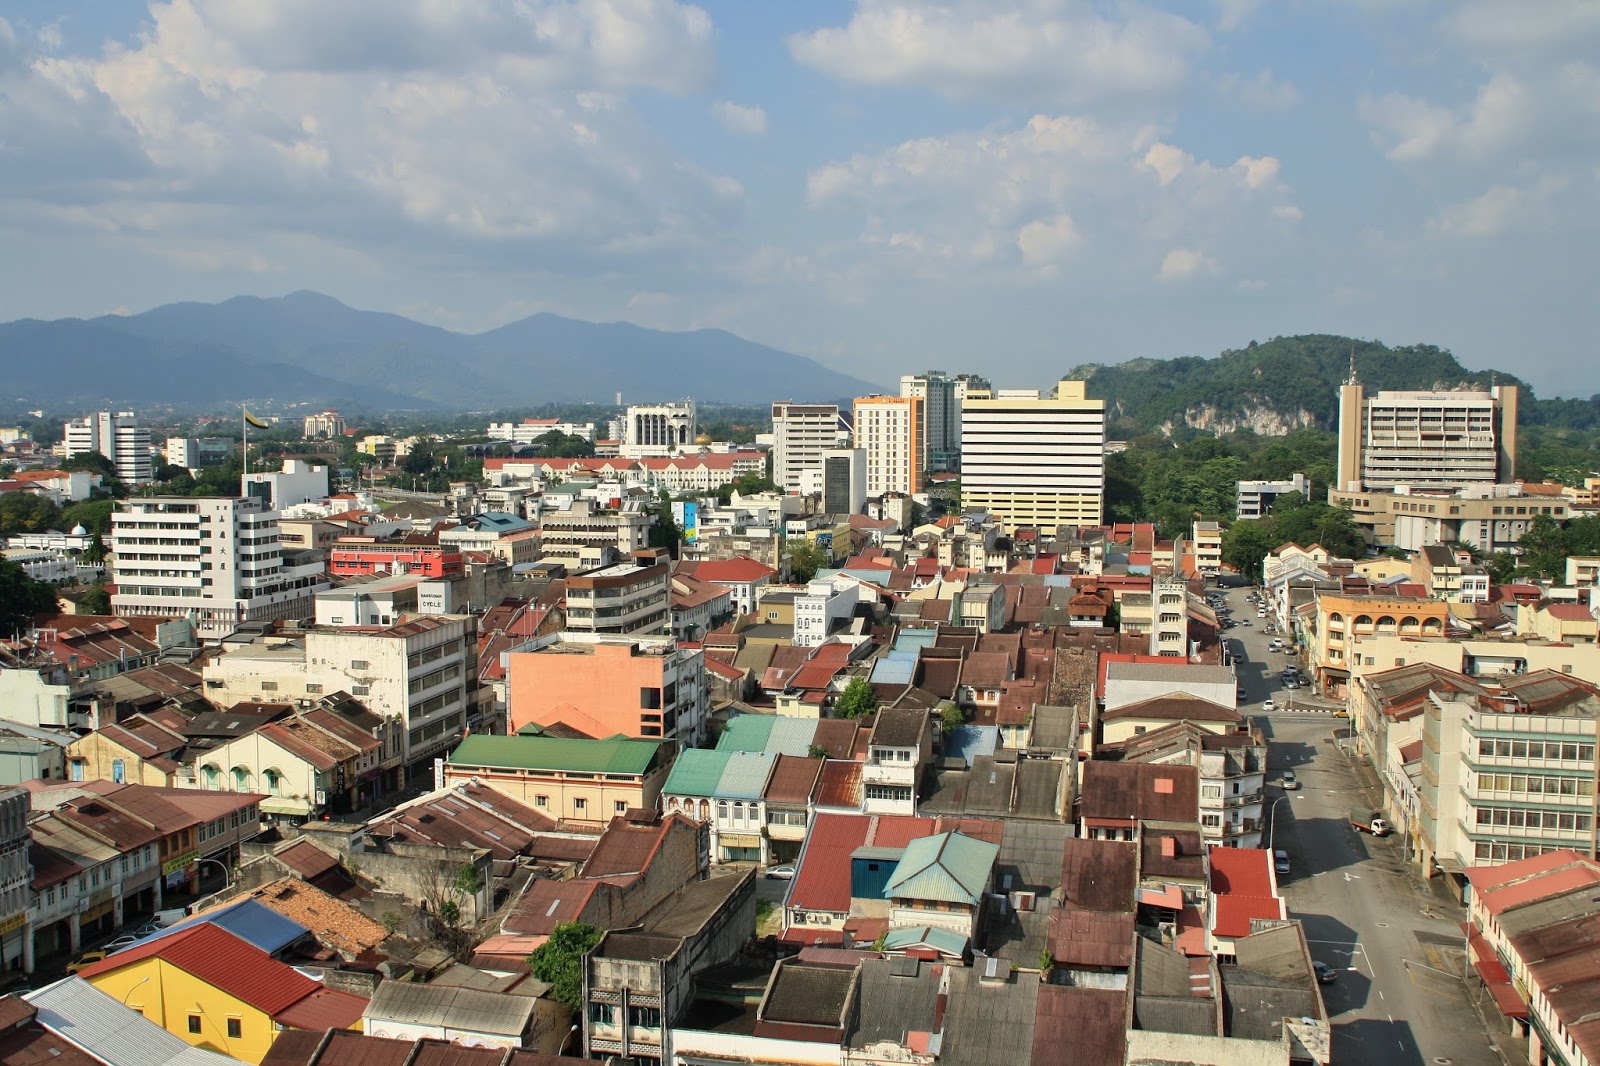 Images of Ipoh: Ipoh Skyline of January 2016